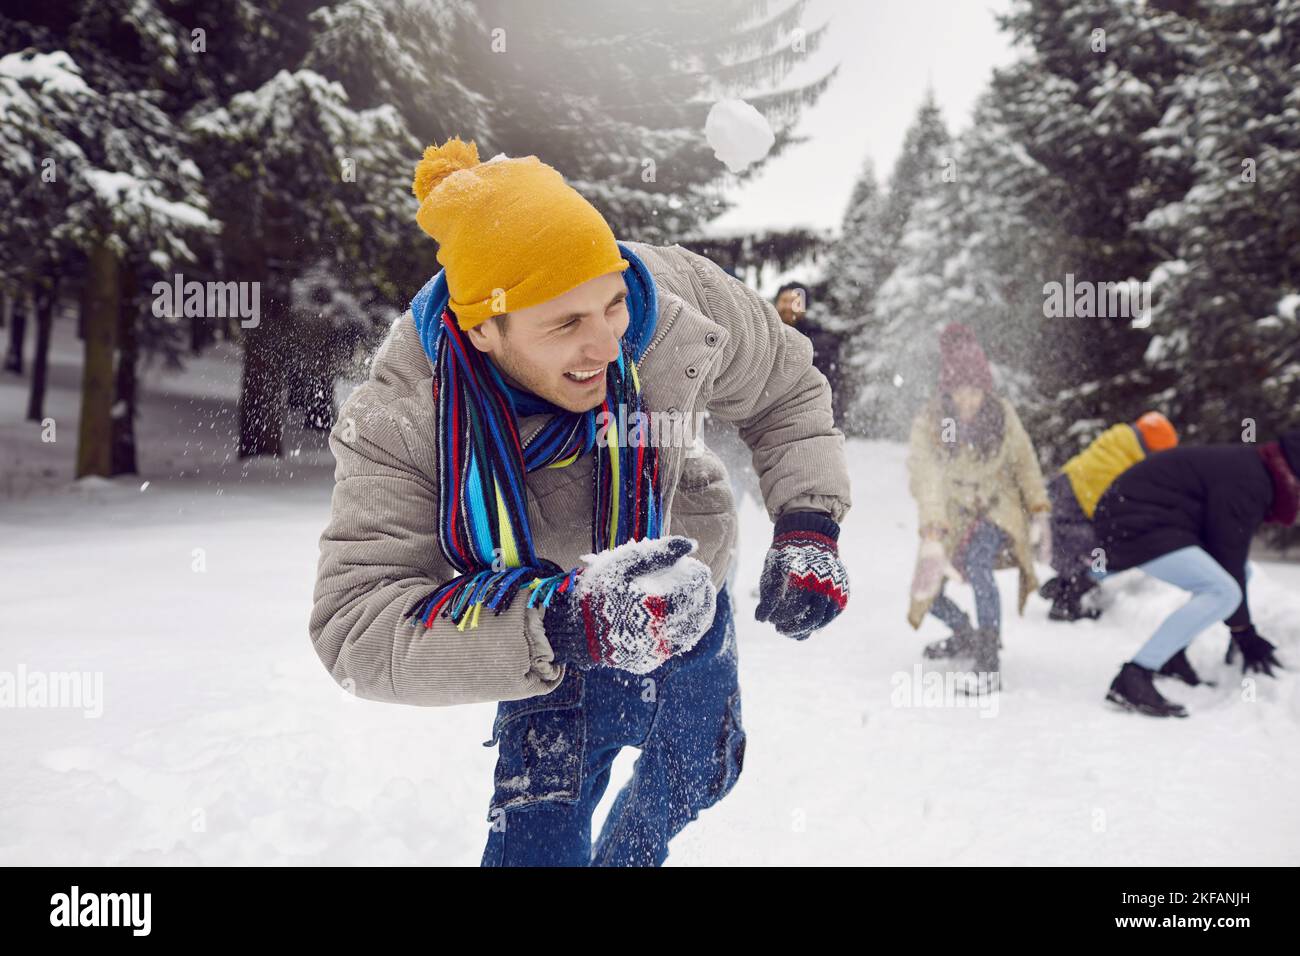 Young cheerful man laughing out loud while playing snowballs with friends in snowy forest. Stock Photo